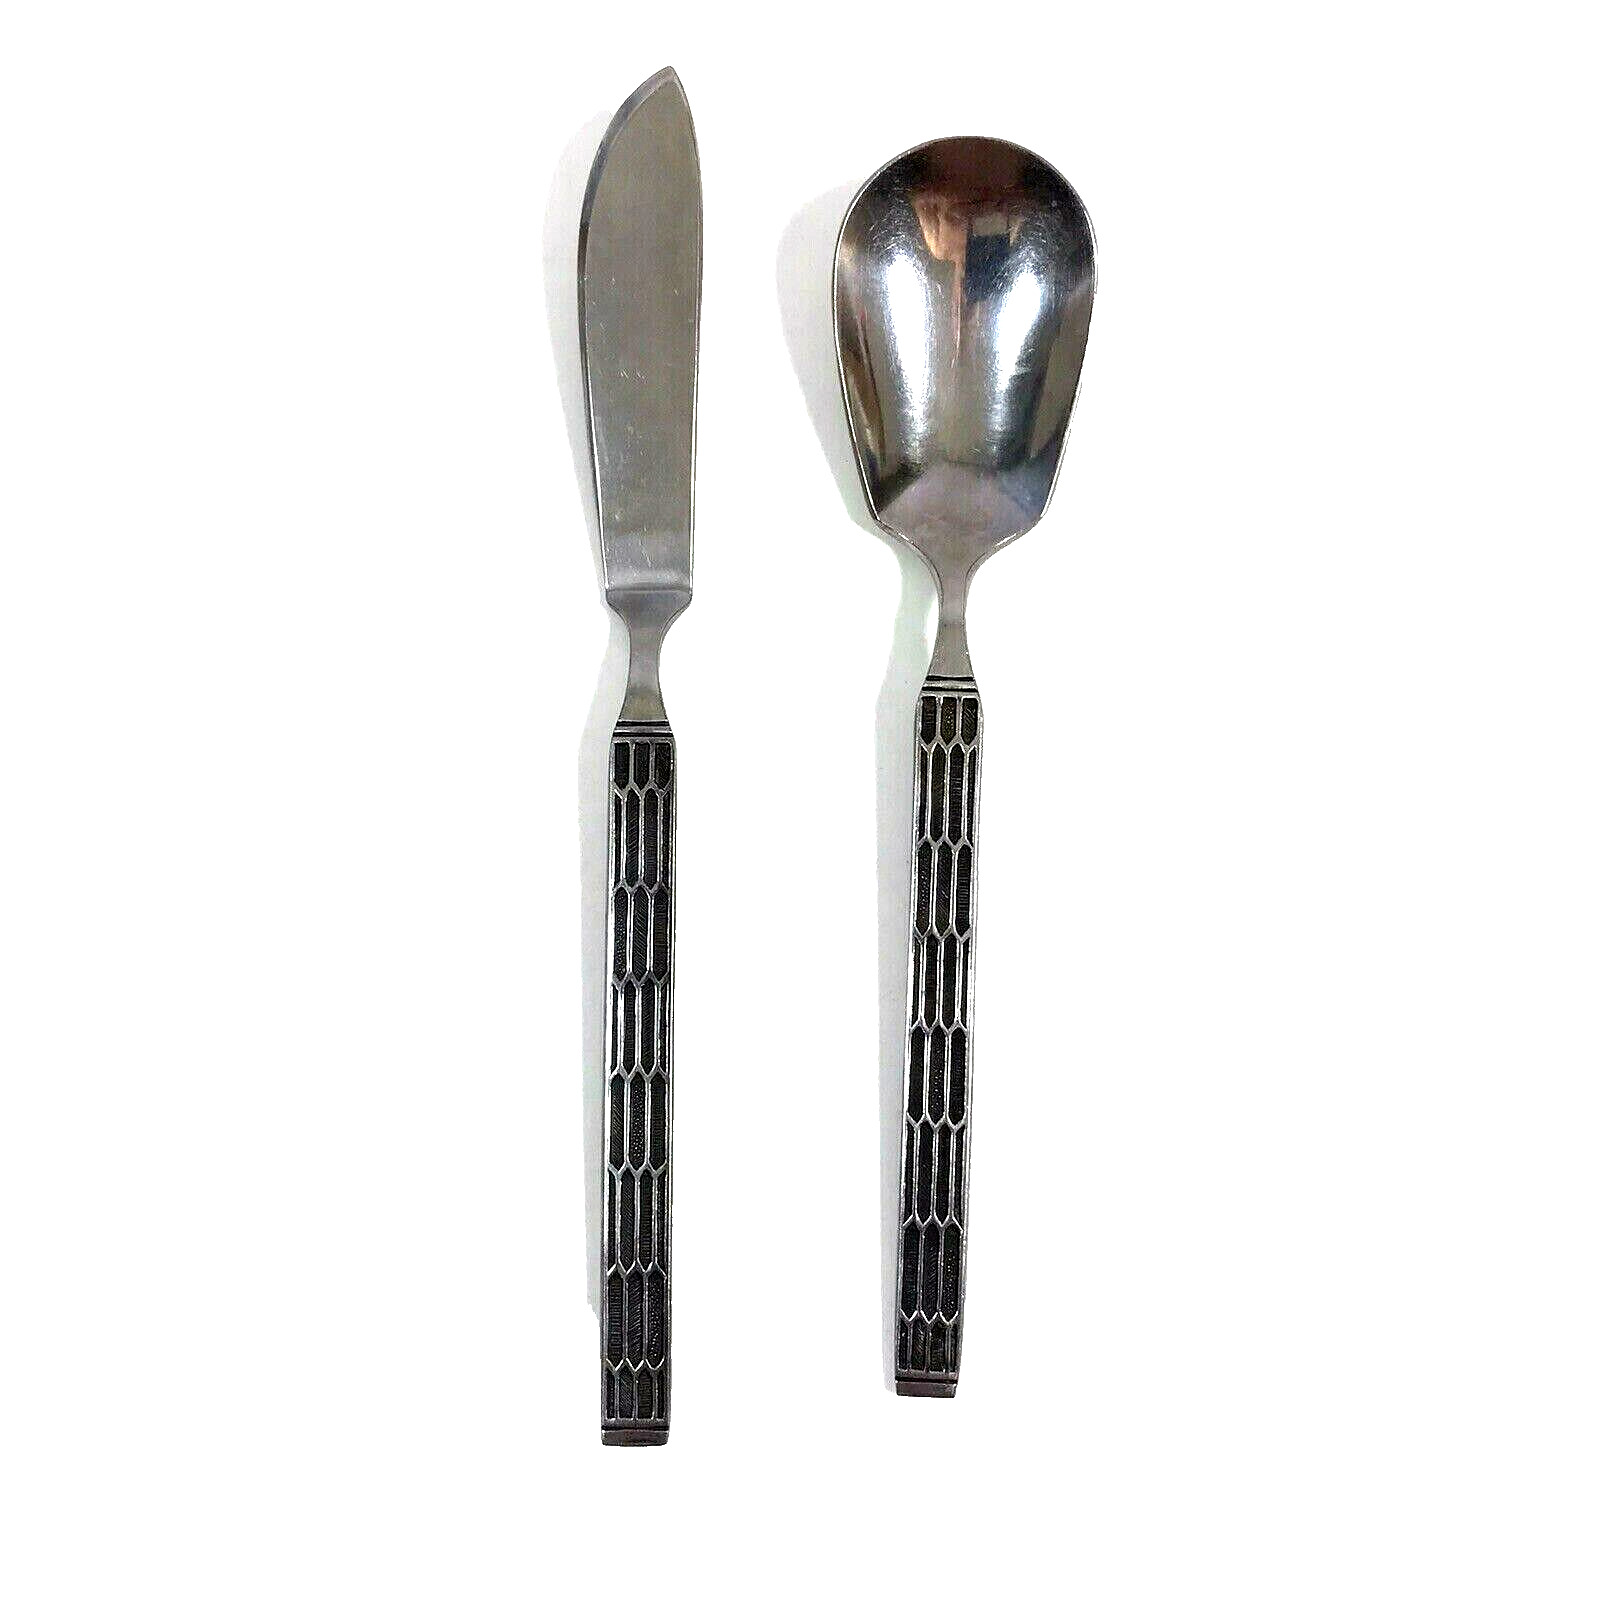 Orleans Silver Stainless Flatware AEGEAN Sugar Spoon and Butter Knife Geometric